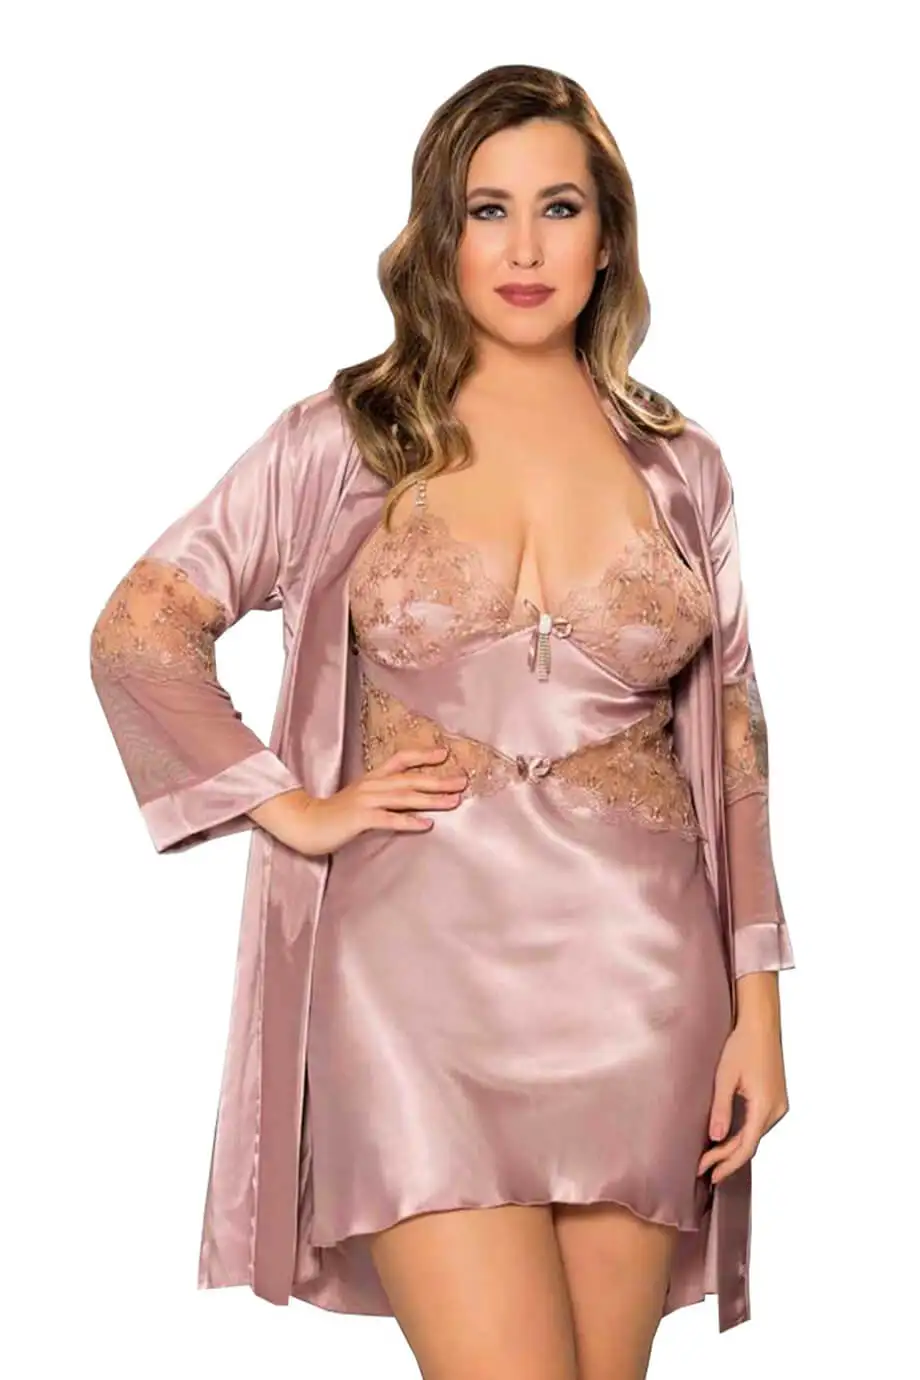 

Plus Size Nightwear 2021 New Seasons Luxury Satin Nightgowns Sold At Affordable Prices Mink Color